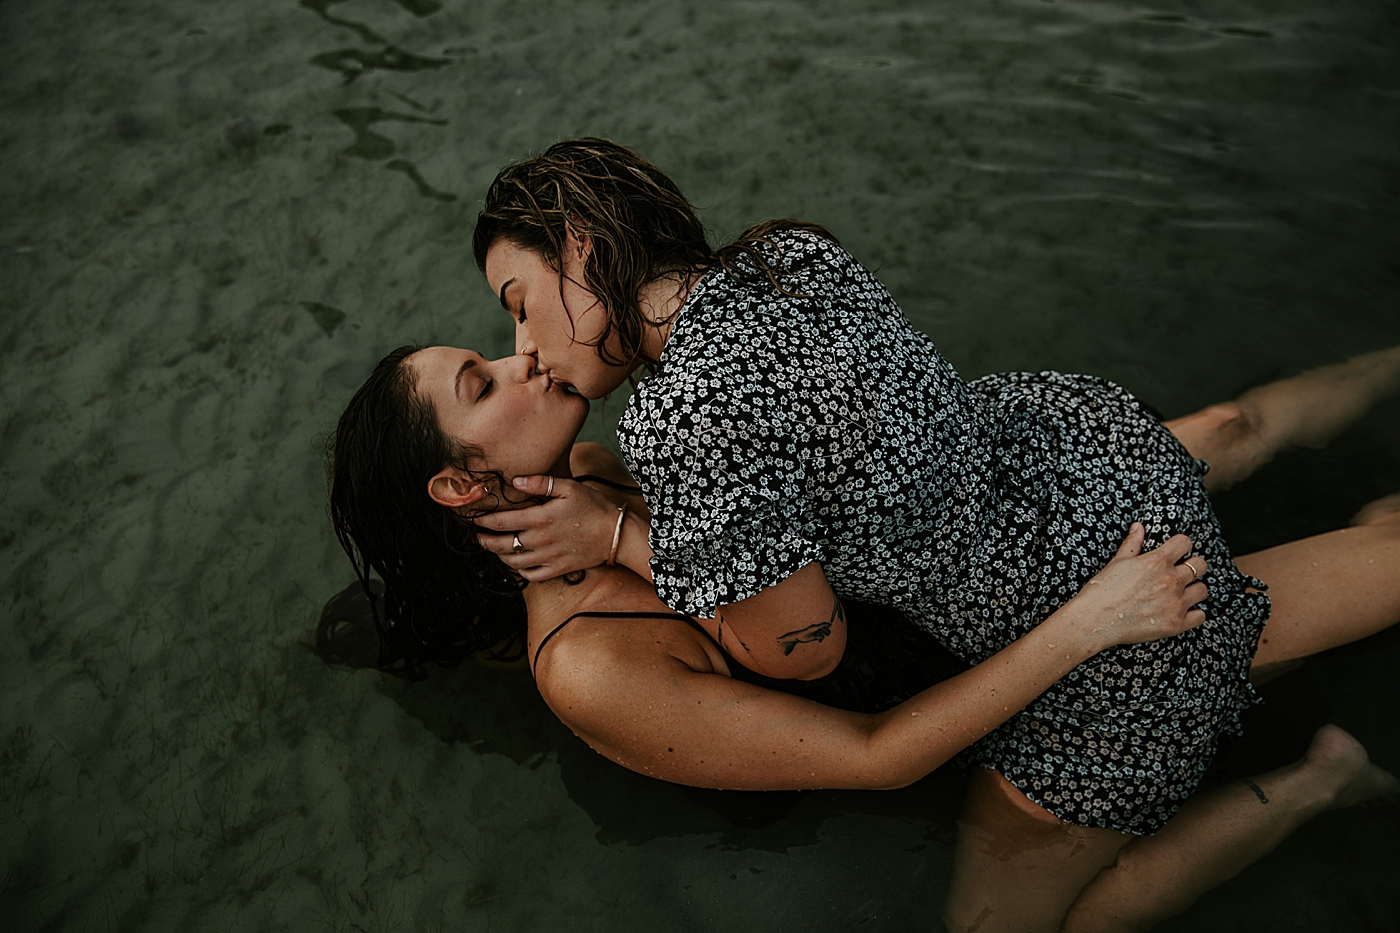 Woman on top of lady kissing each other in the water South Florida LGBTQ+ Engagement Photography captured by Maggie Alvarez Photography